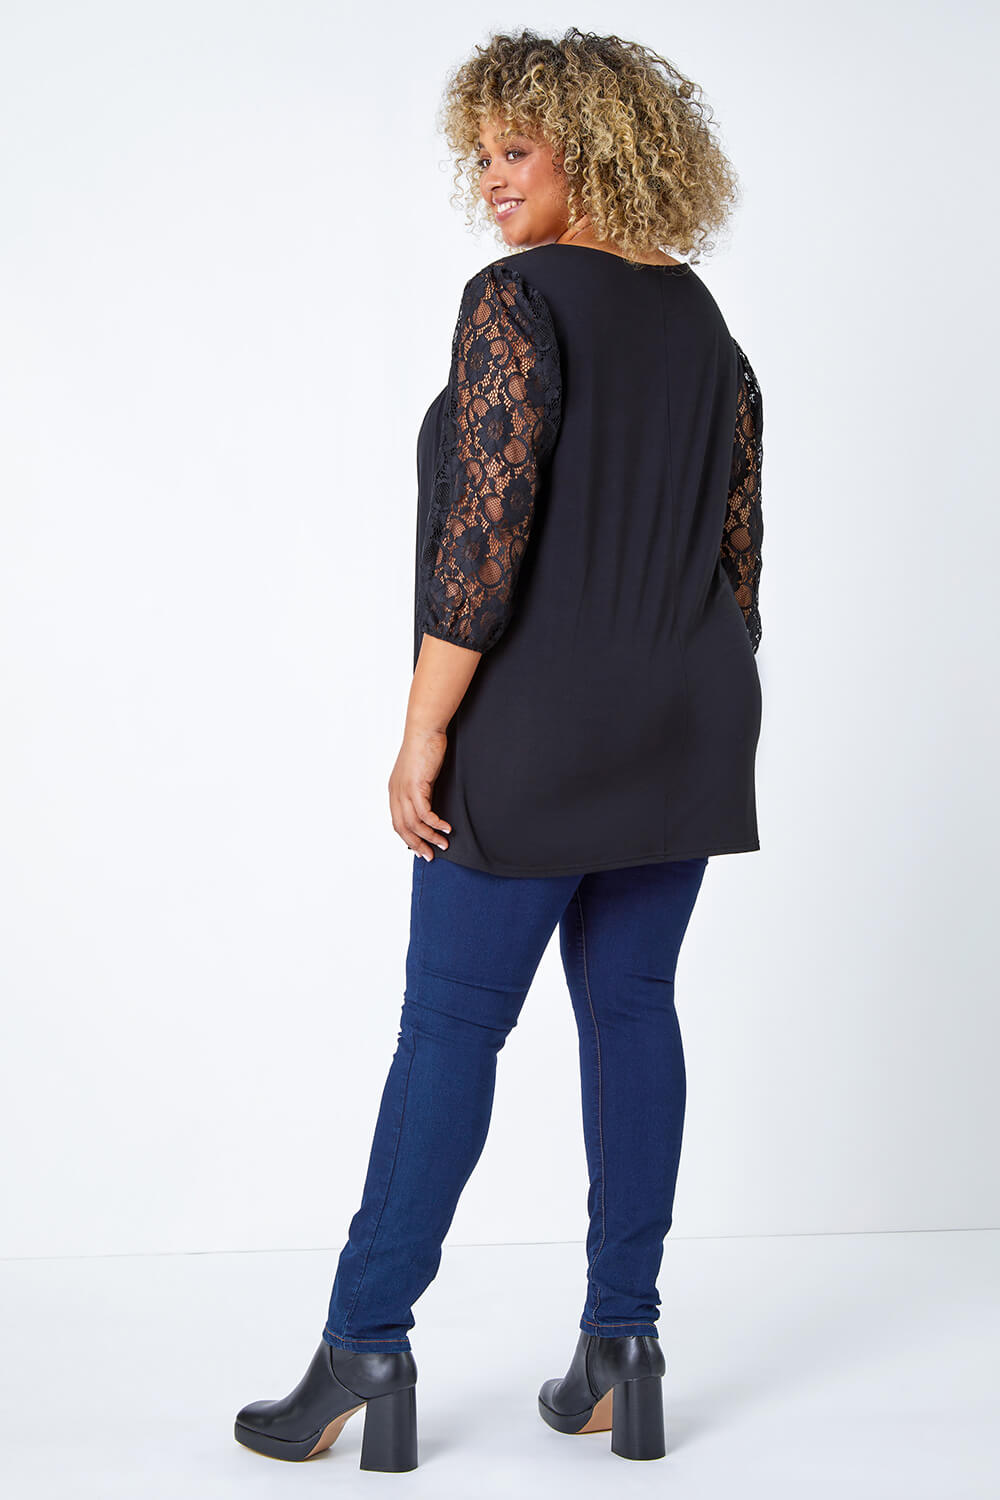 Black Curve Lace Detail Stretch Top, Image 3 of 5